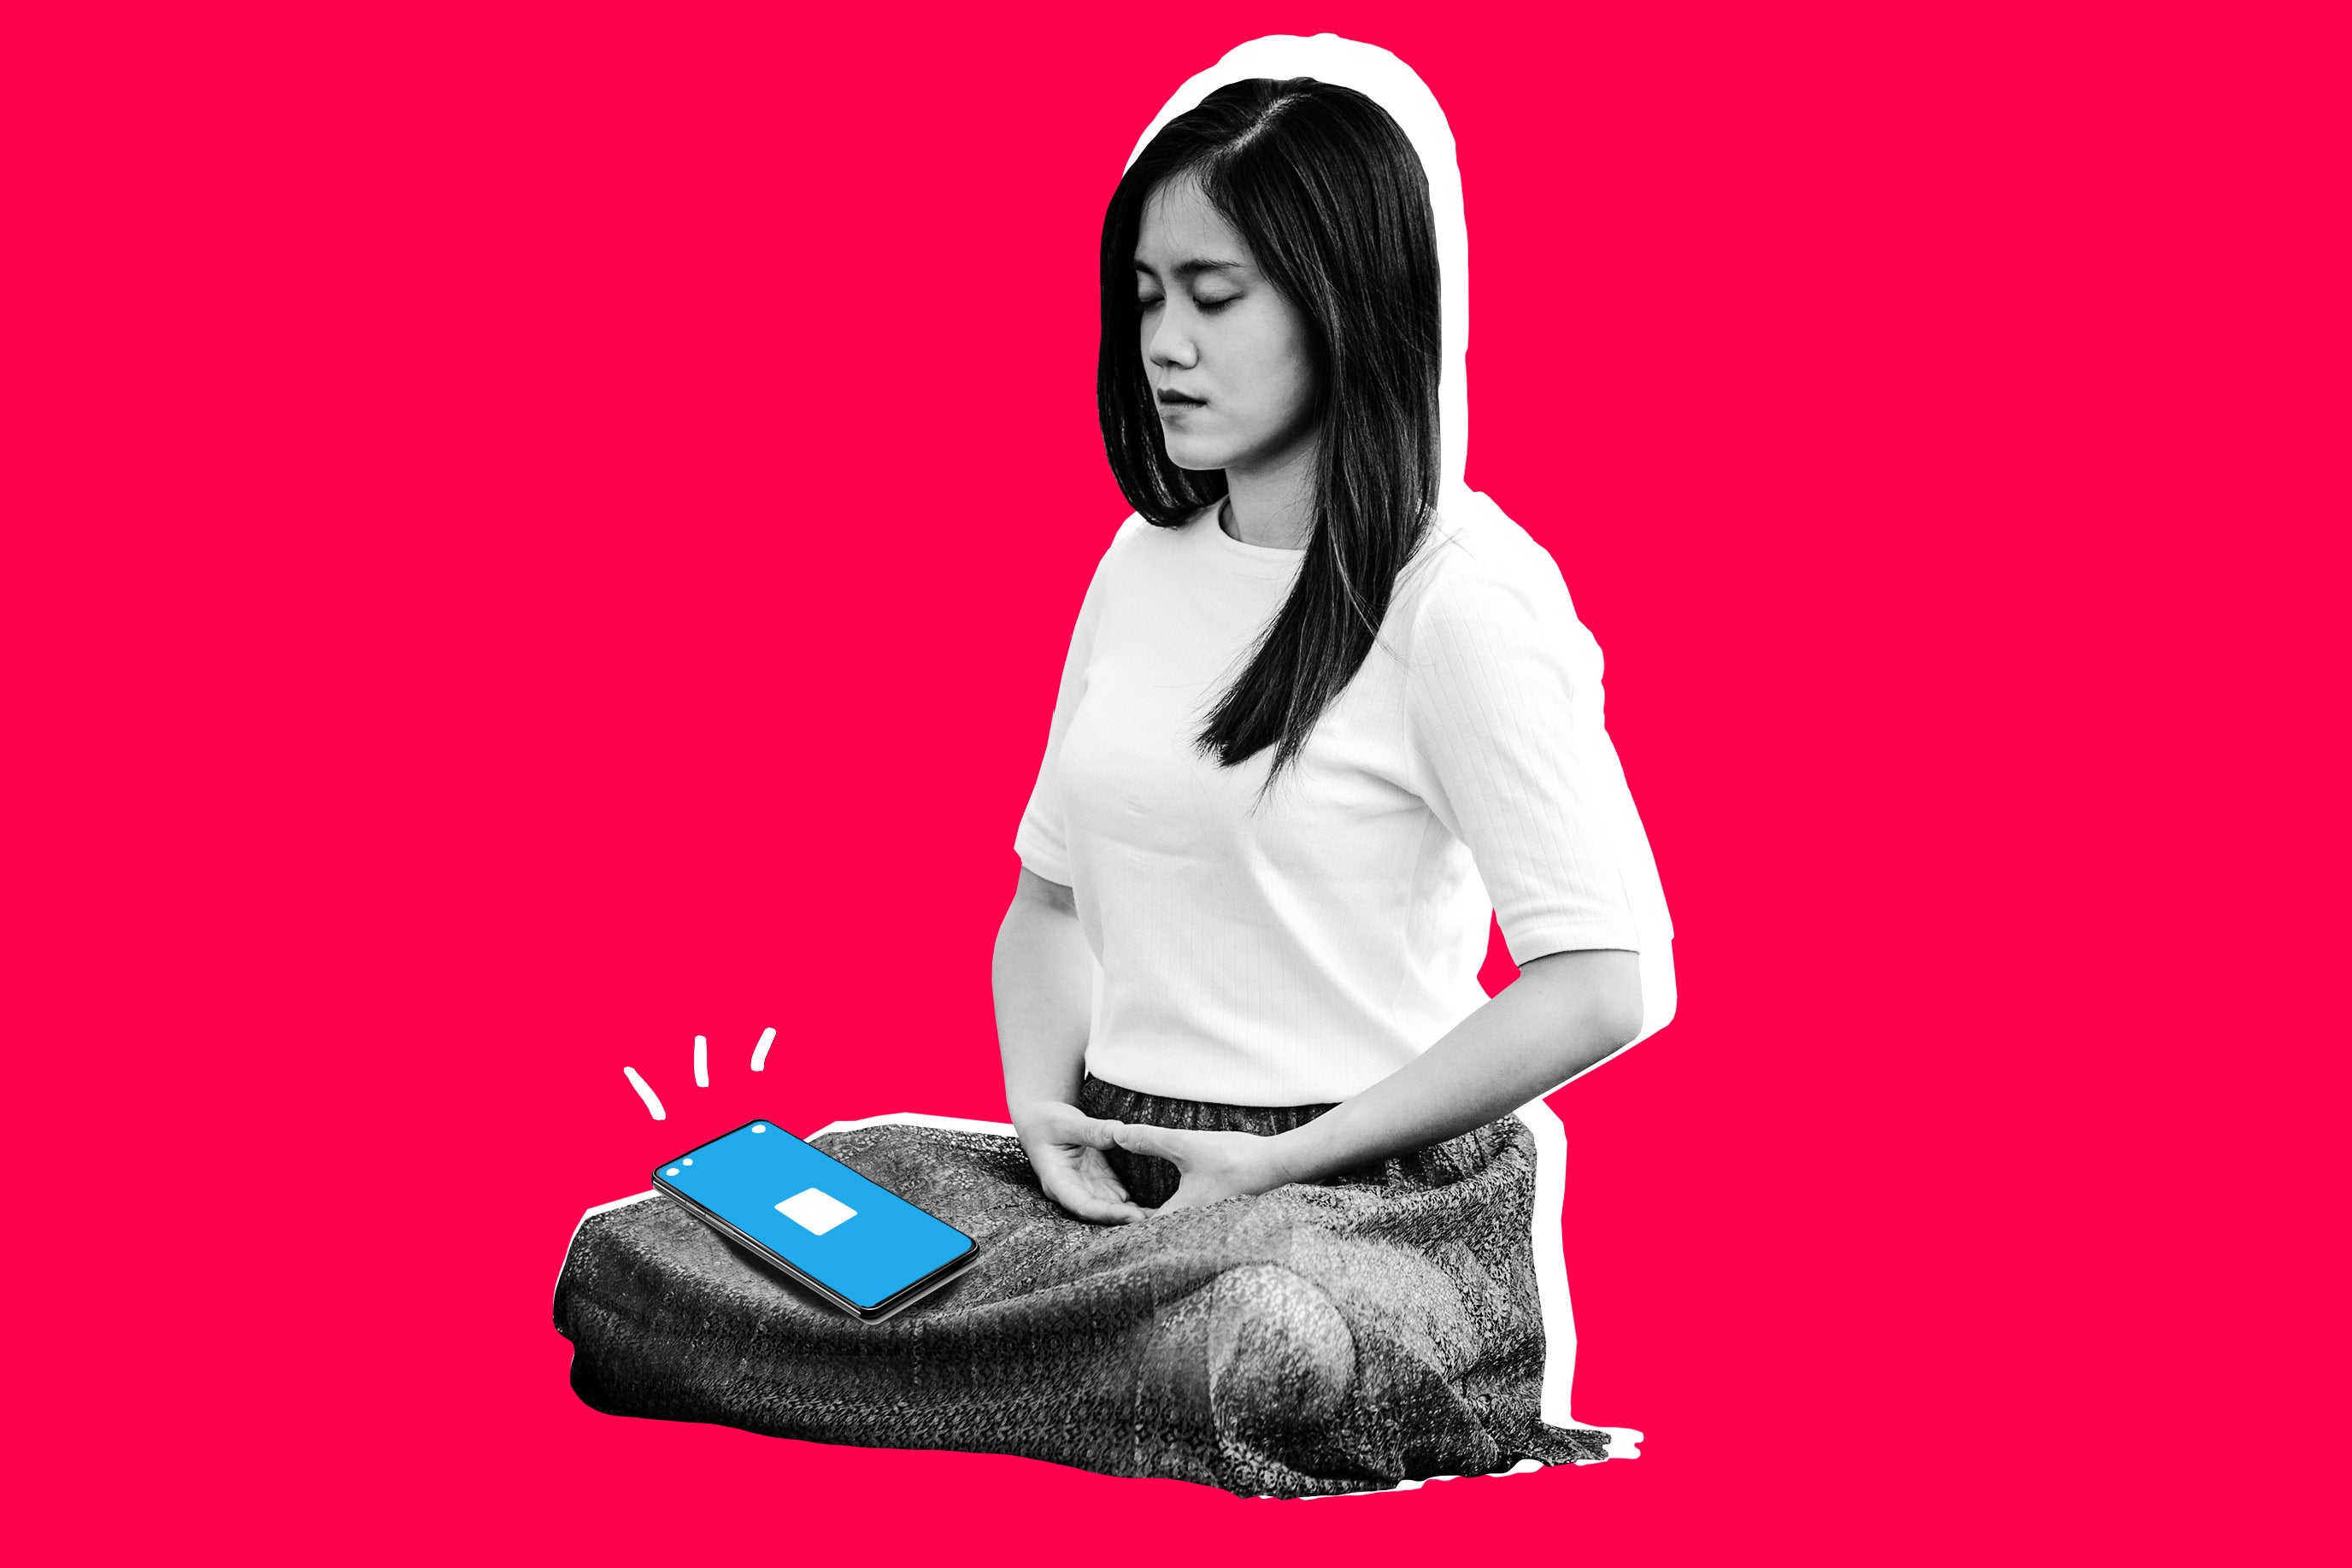 Collage of woman meditating with a smartphone on her lap.